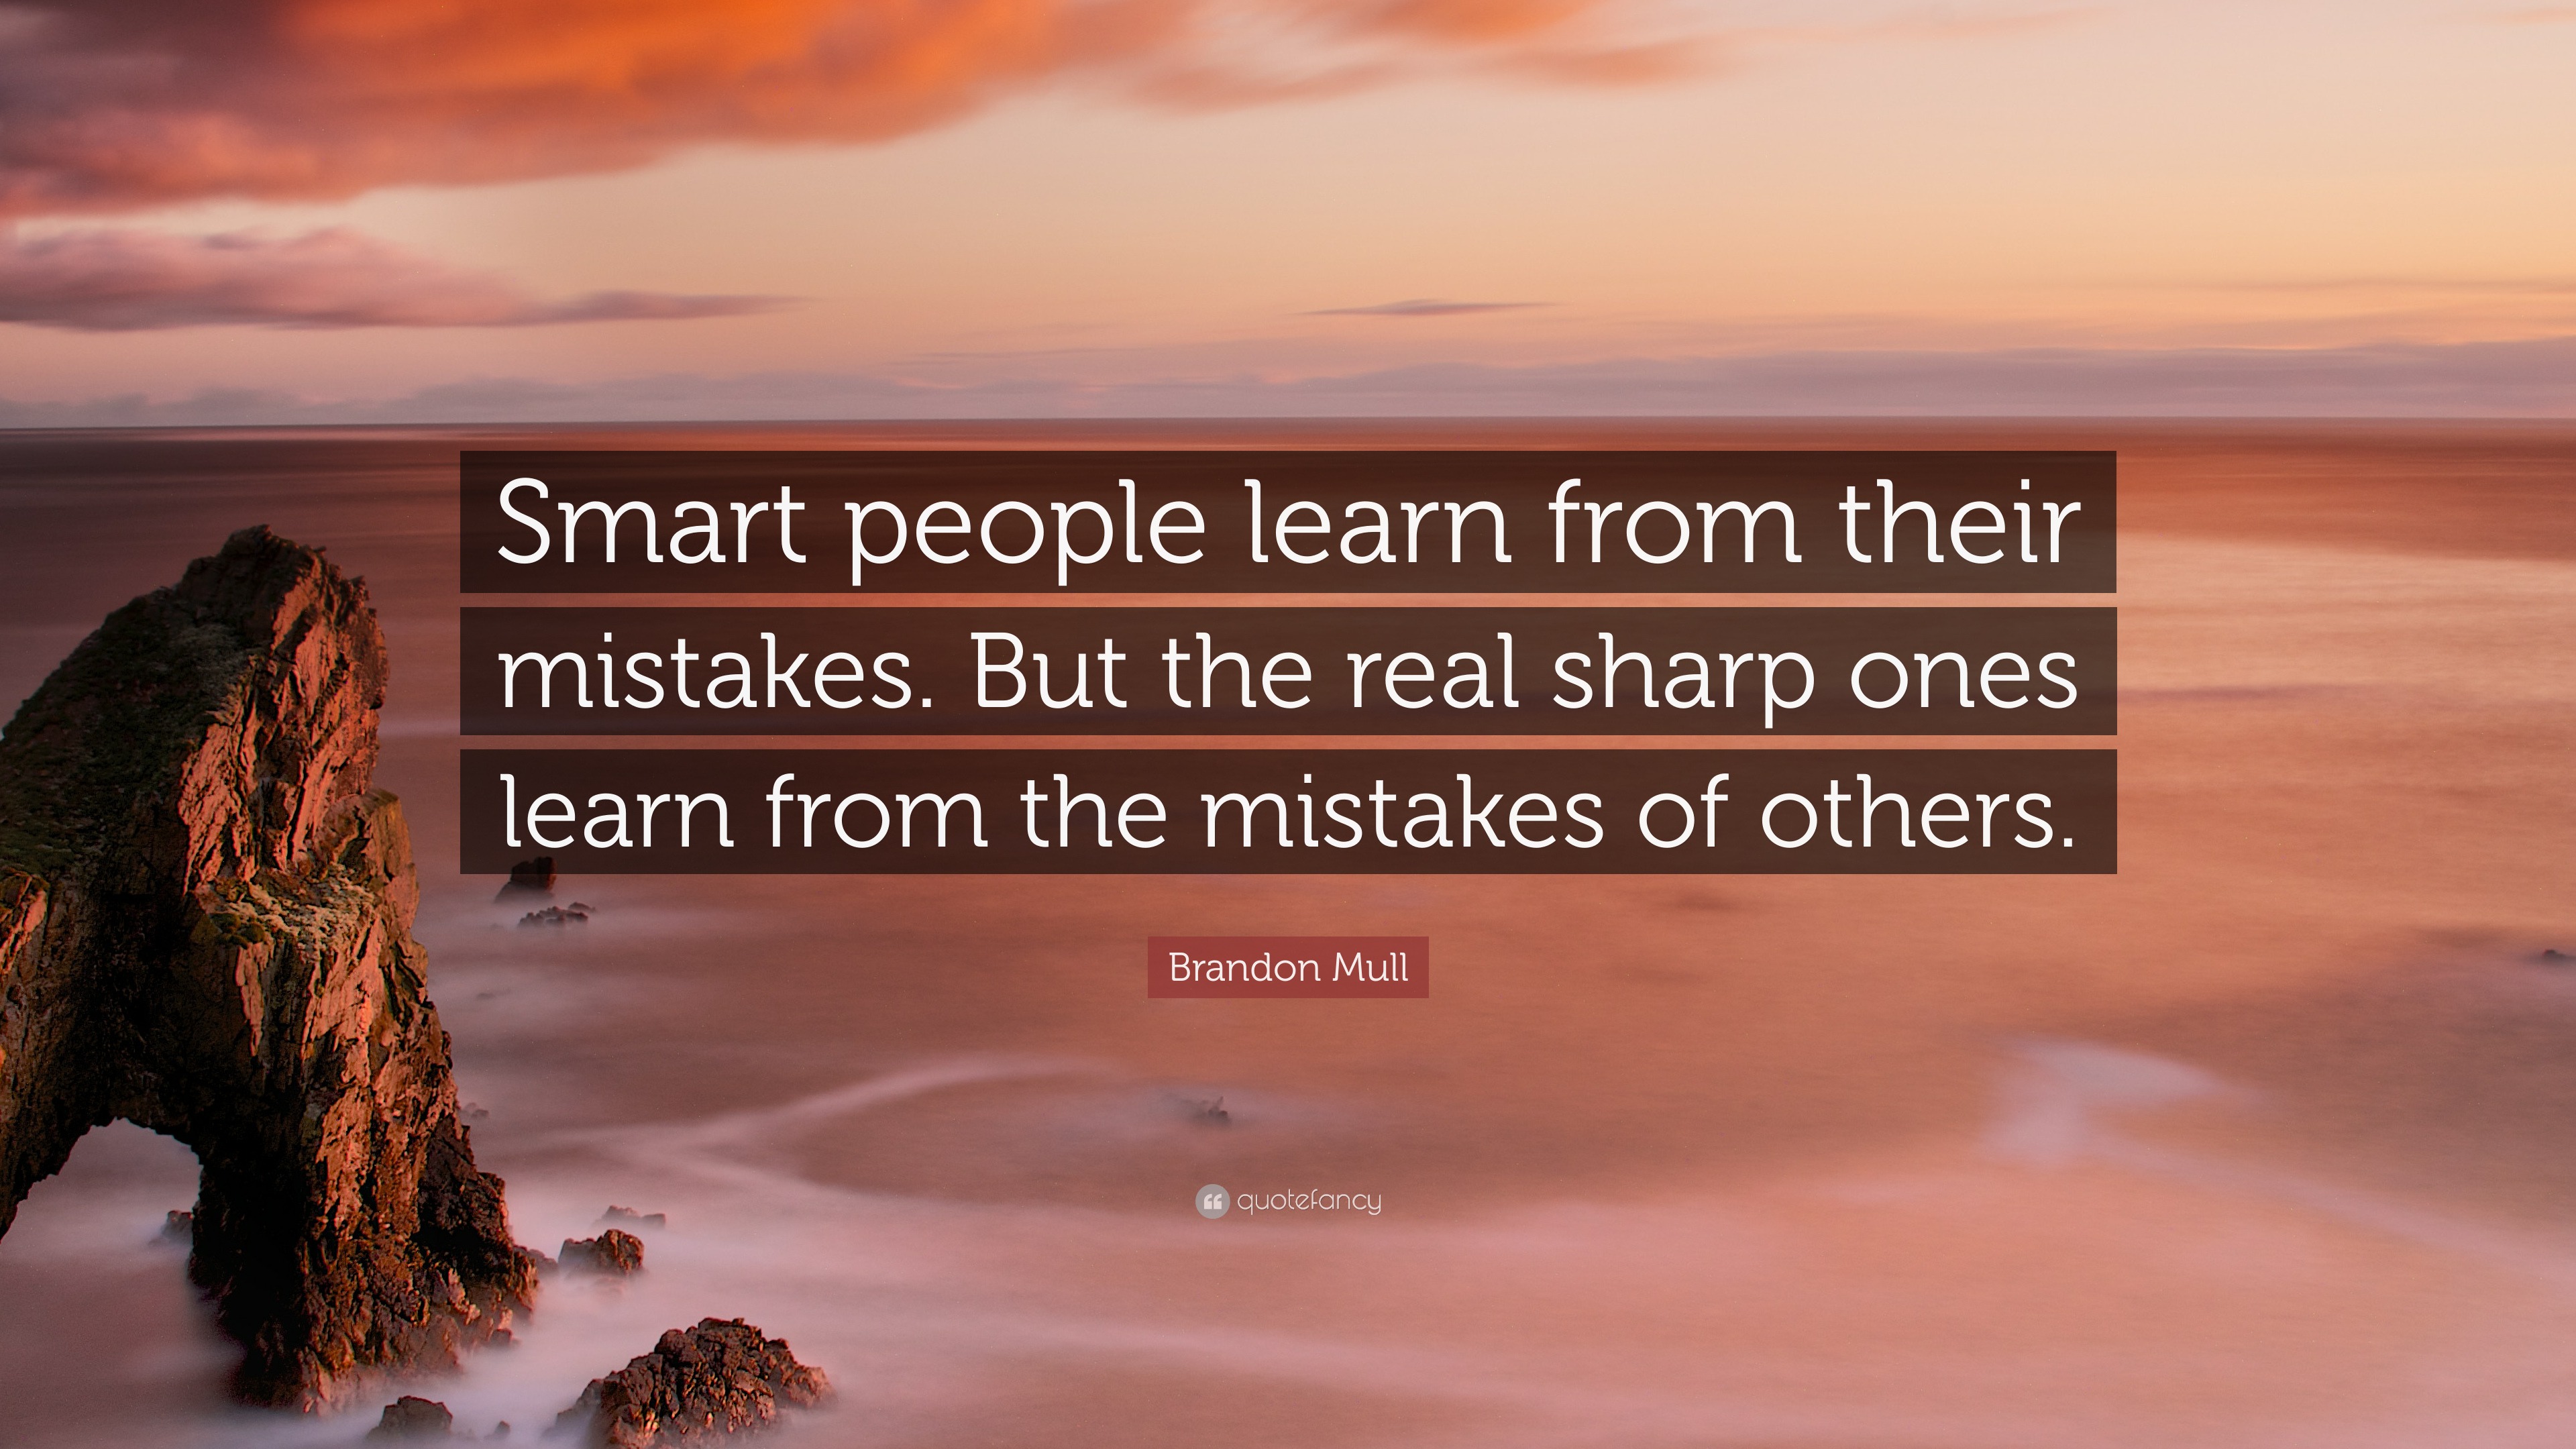 Brandon Mull Quote “Smart people learn from their